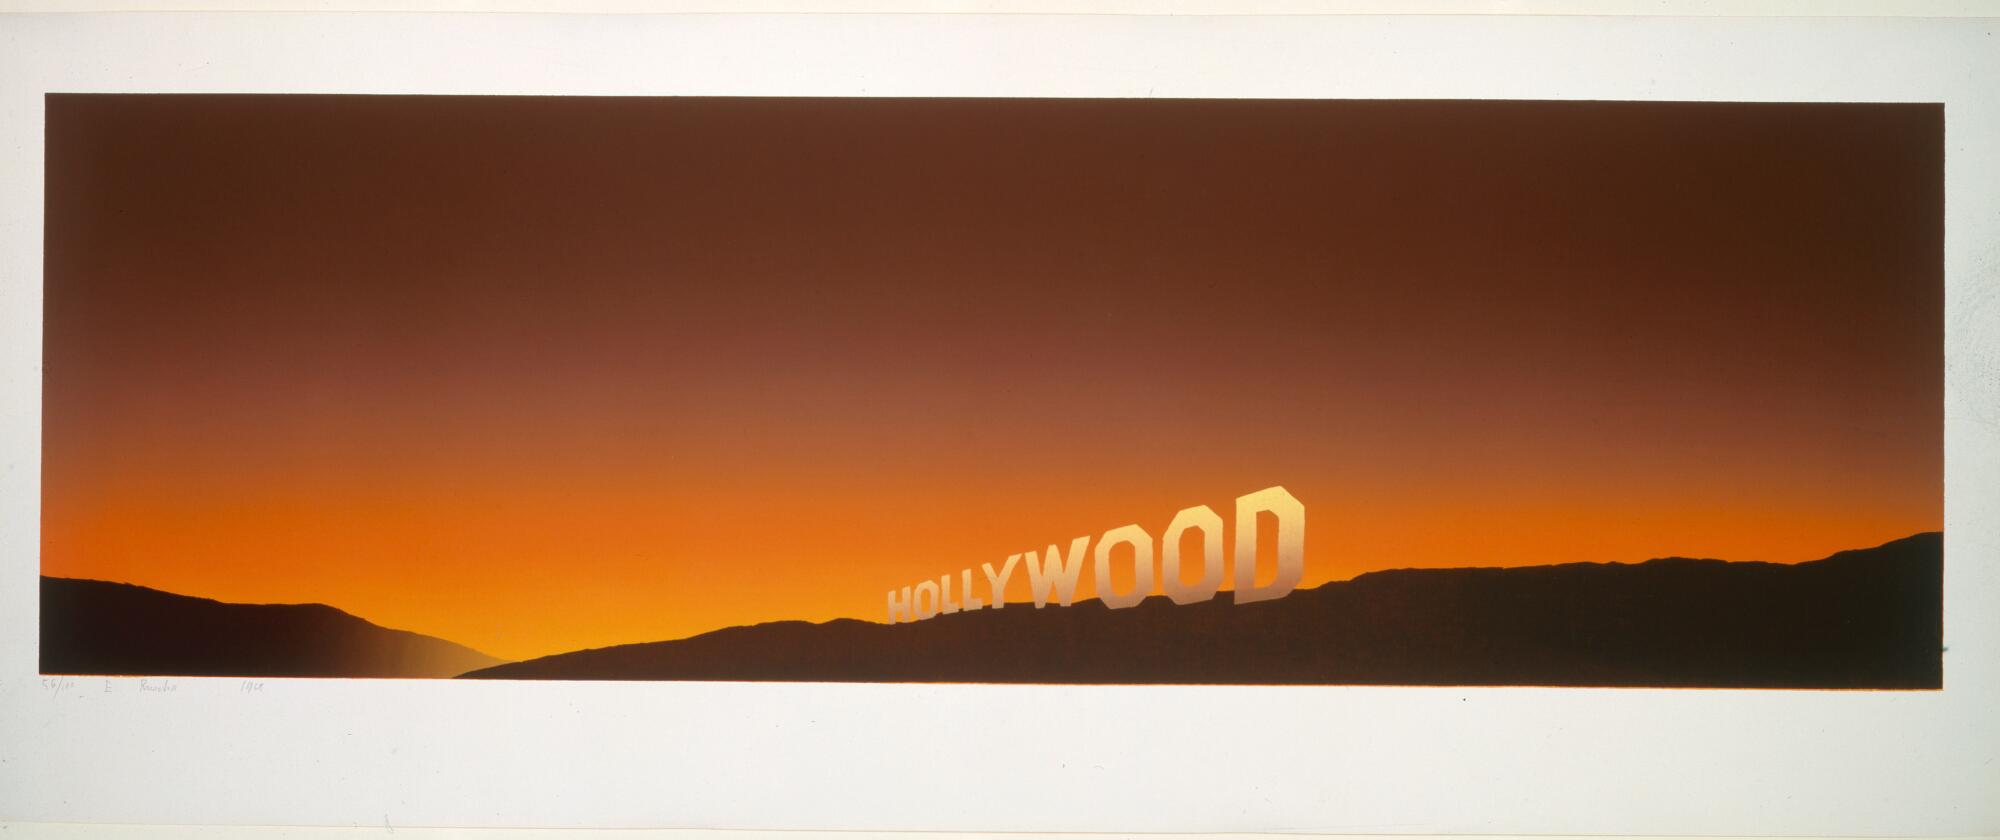 Hollywood sign Ed Ruscha, Hollywood, 1968, Los Angeles County Museum of Art, Museum Acquisition Fund, ? Ed Ruscha, photo